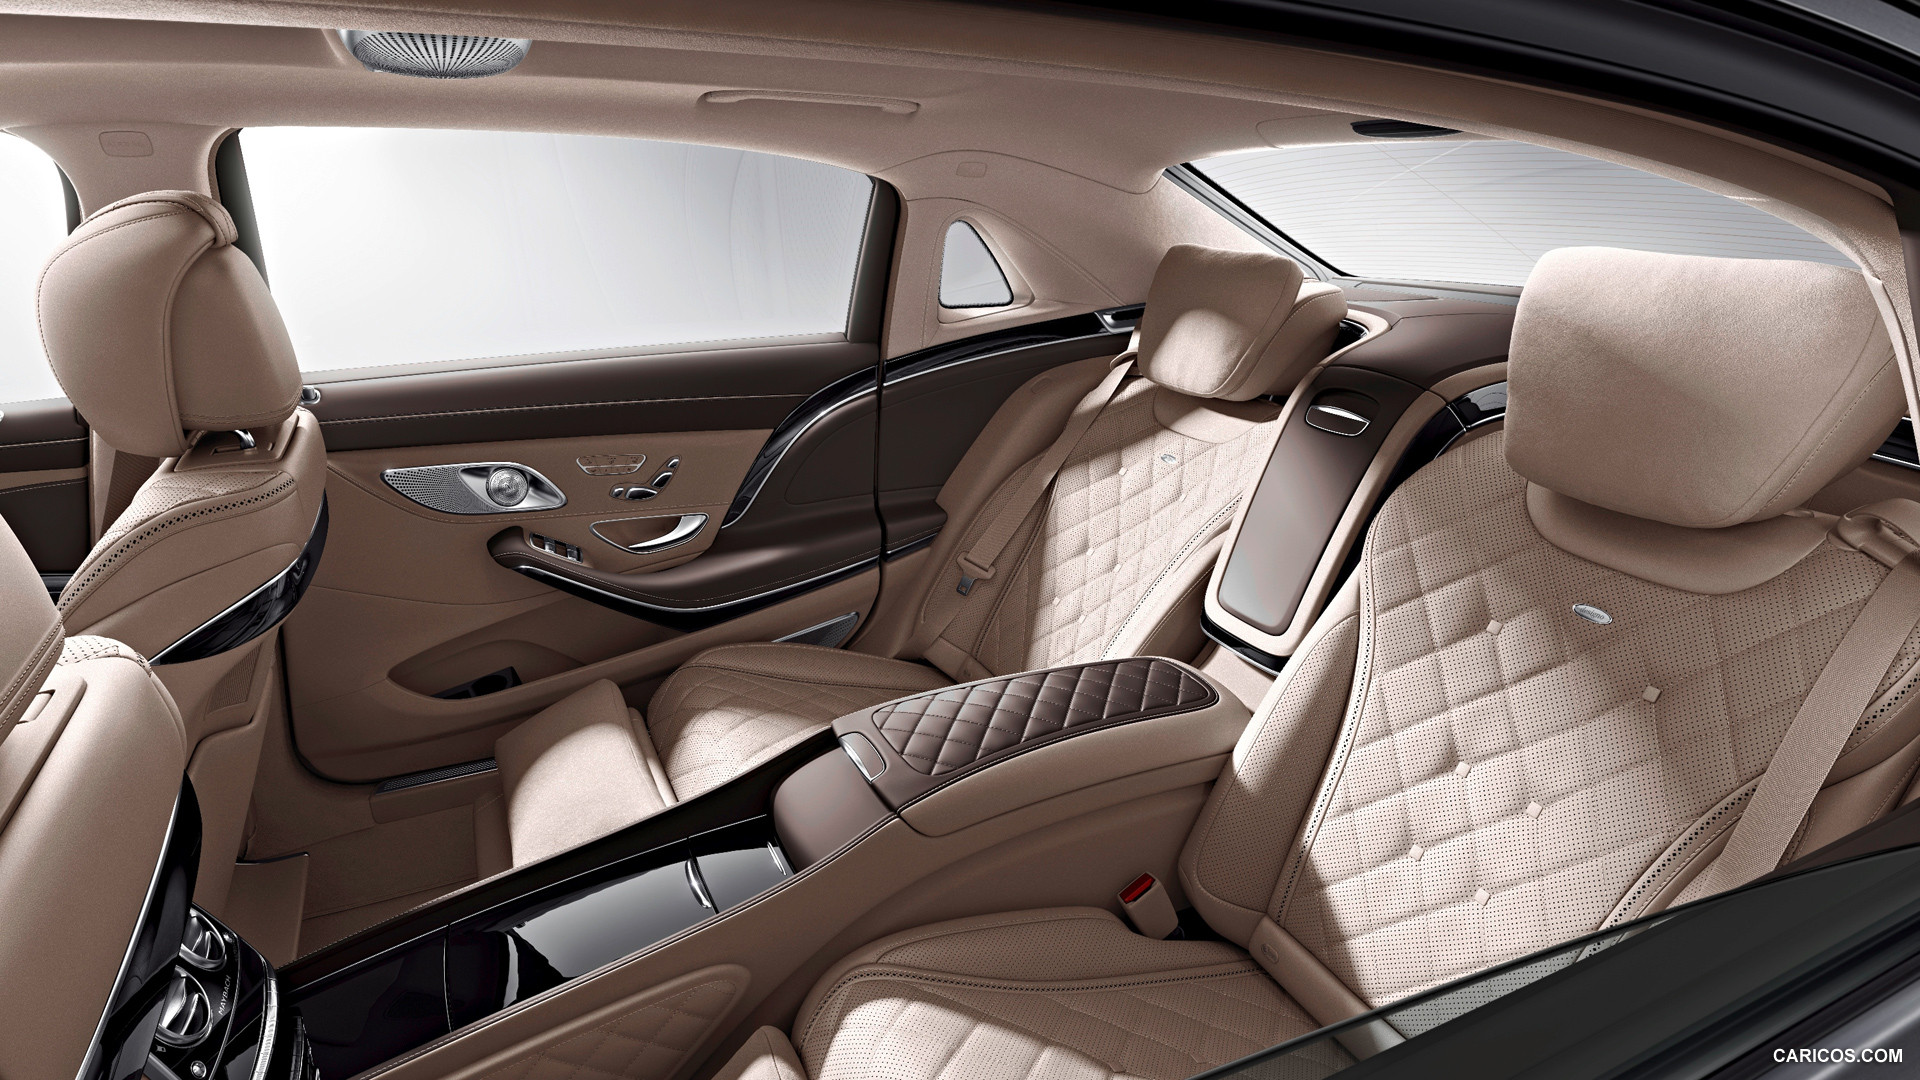 2016 Mercedes-Maybach S-Class S600 - Interior Rear Seats, #32 of 225